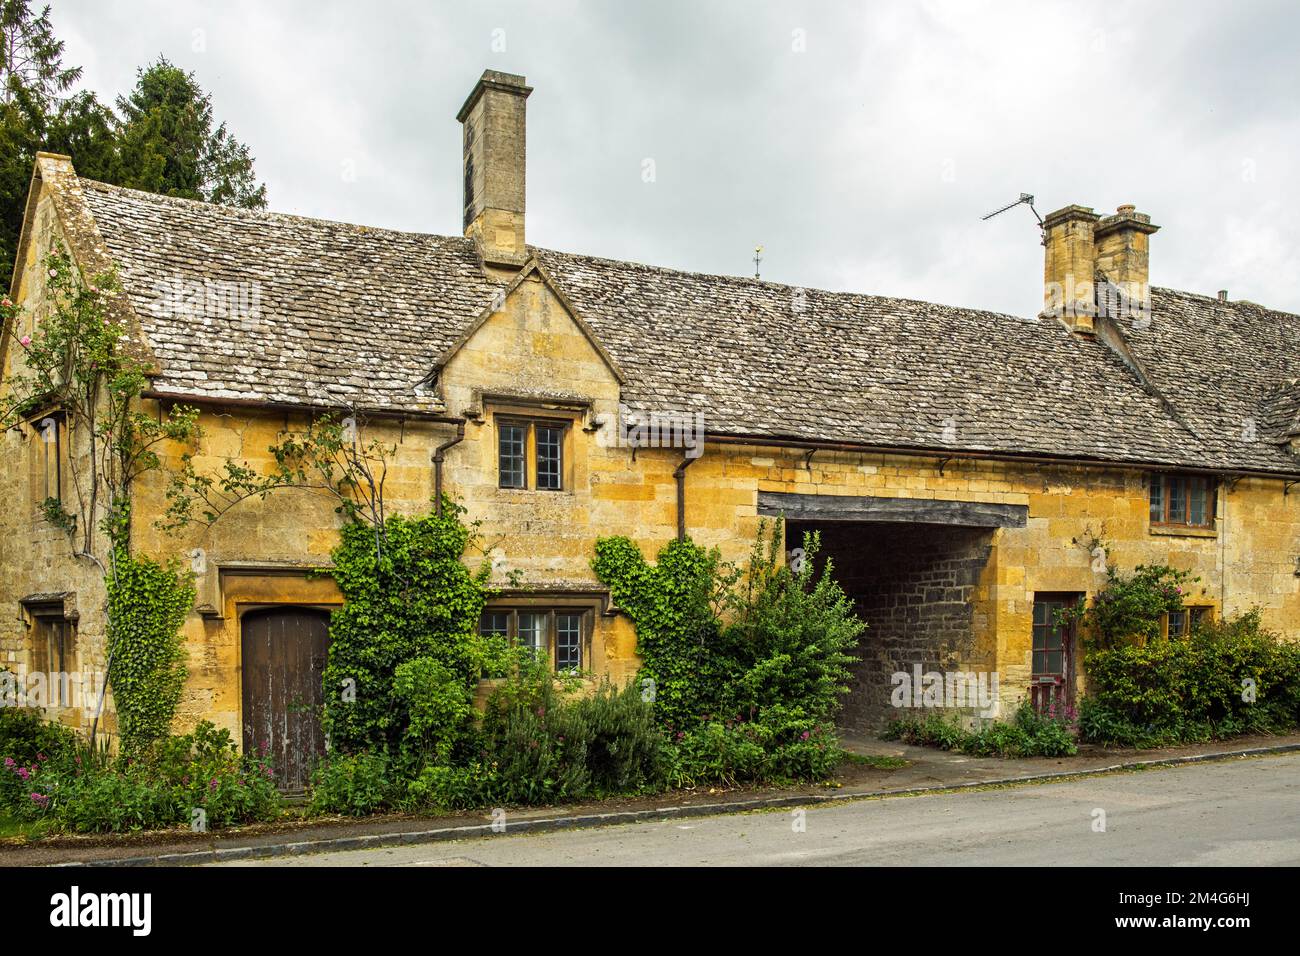 Limestone cottages in the picturesque Cotswolds village of Stanton in Gloucestershire. Stock Photo